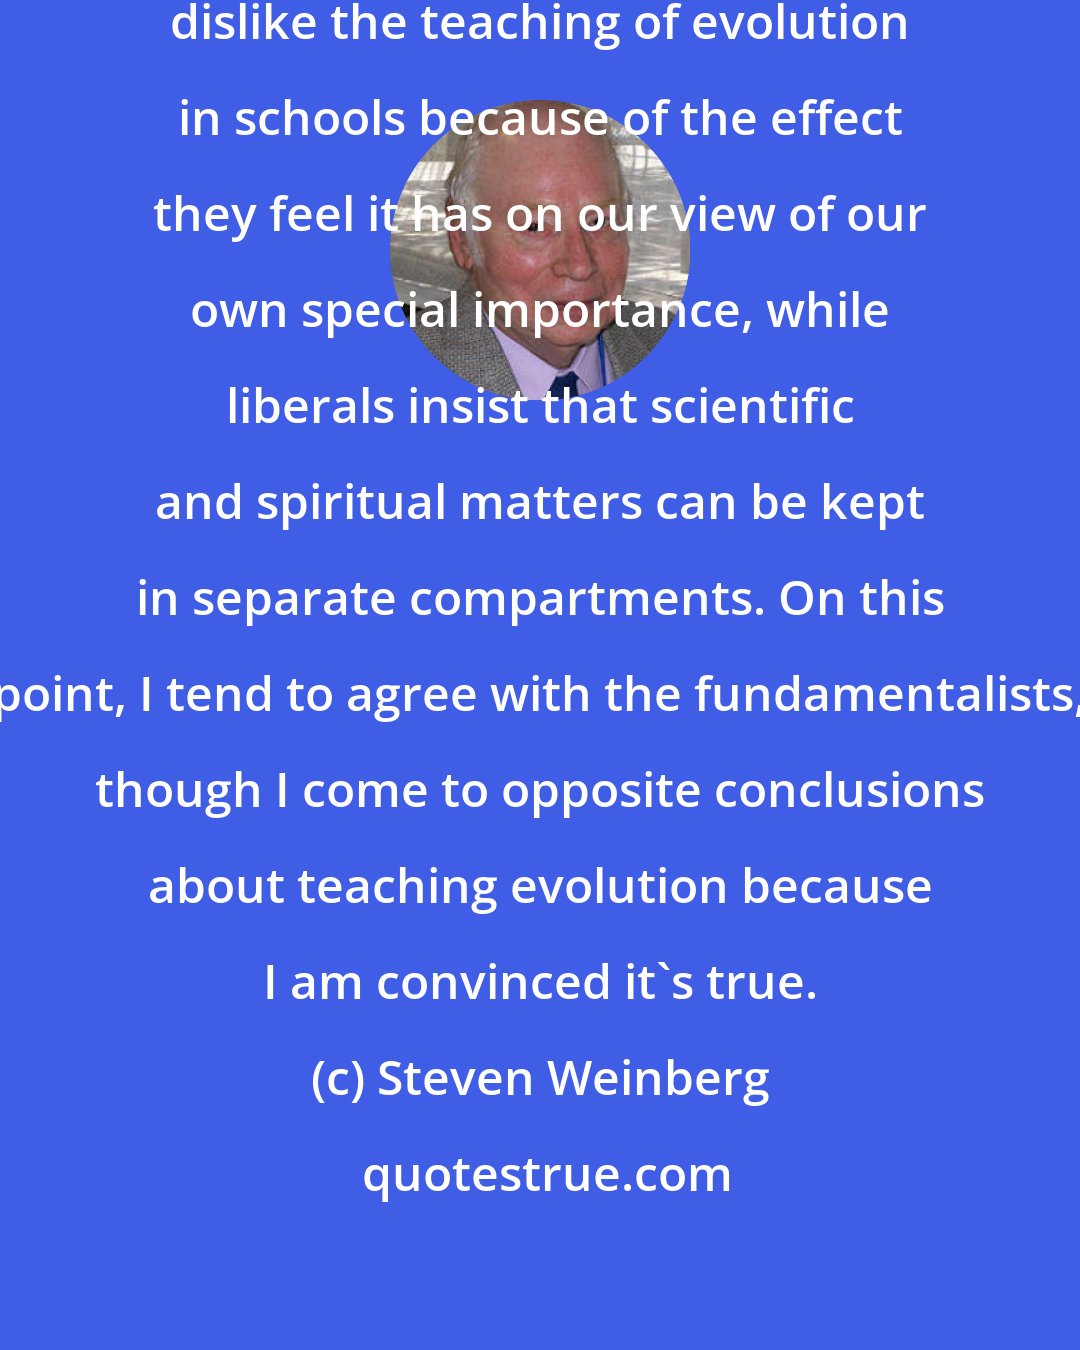 Steven Weinberg: You know, our fundamentalist friends dislike the teaching of evolution in schools because of the effect they feel it has on our view of our own special importance, while liberals insist that scientific and spiritual matters can be kept in separate compartments. On this point, I tend to agree with the fundamentalists, though I come to opposite conclusions about teaching evolution because I am convinced it's true.